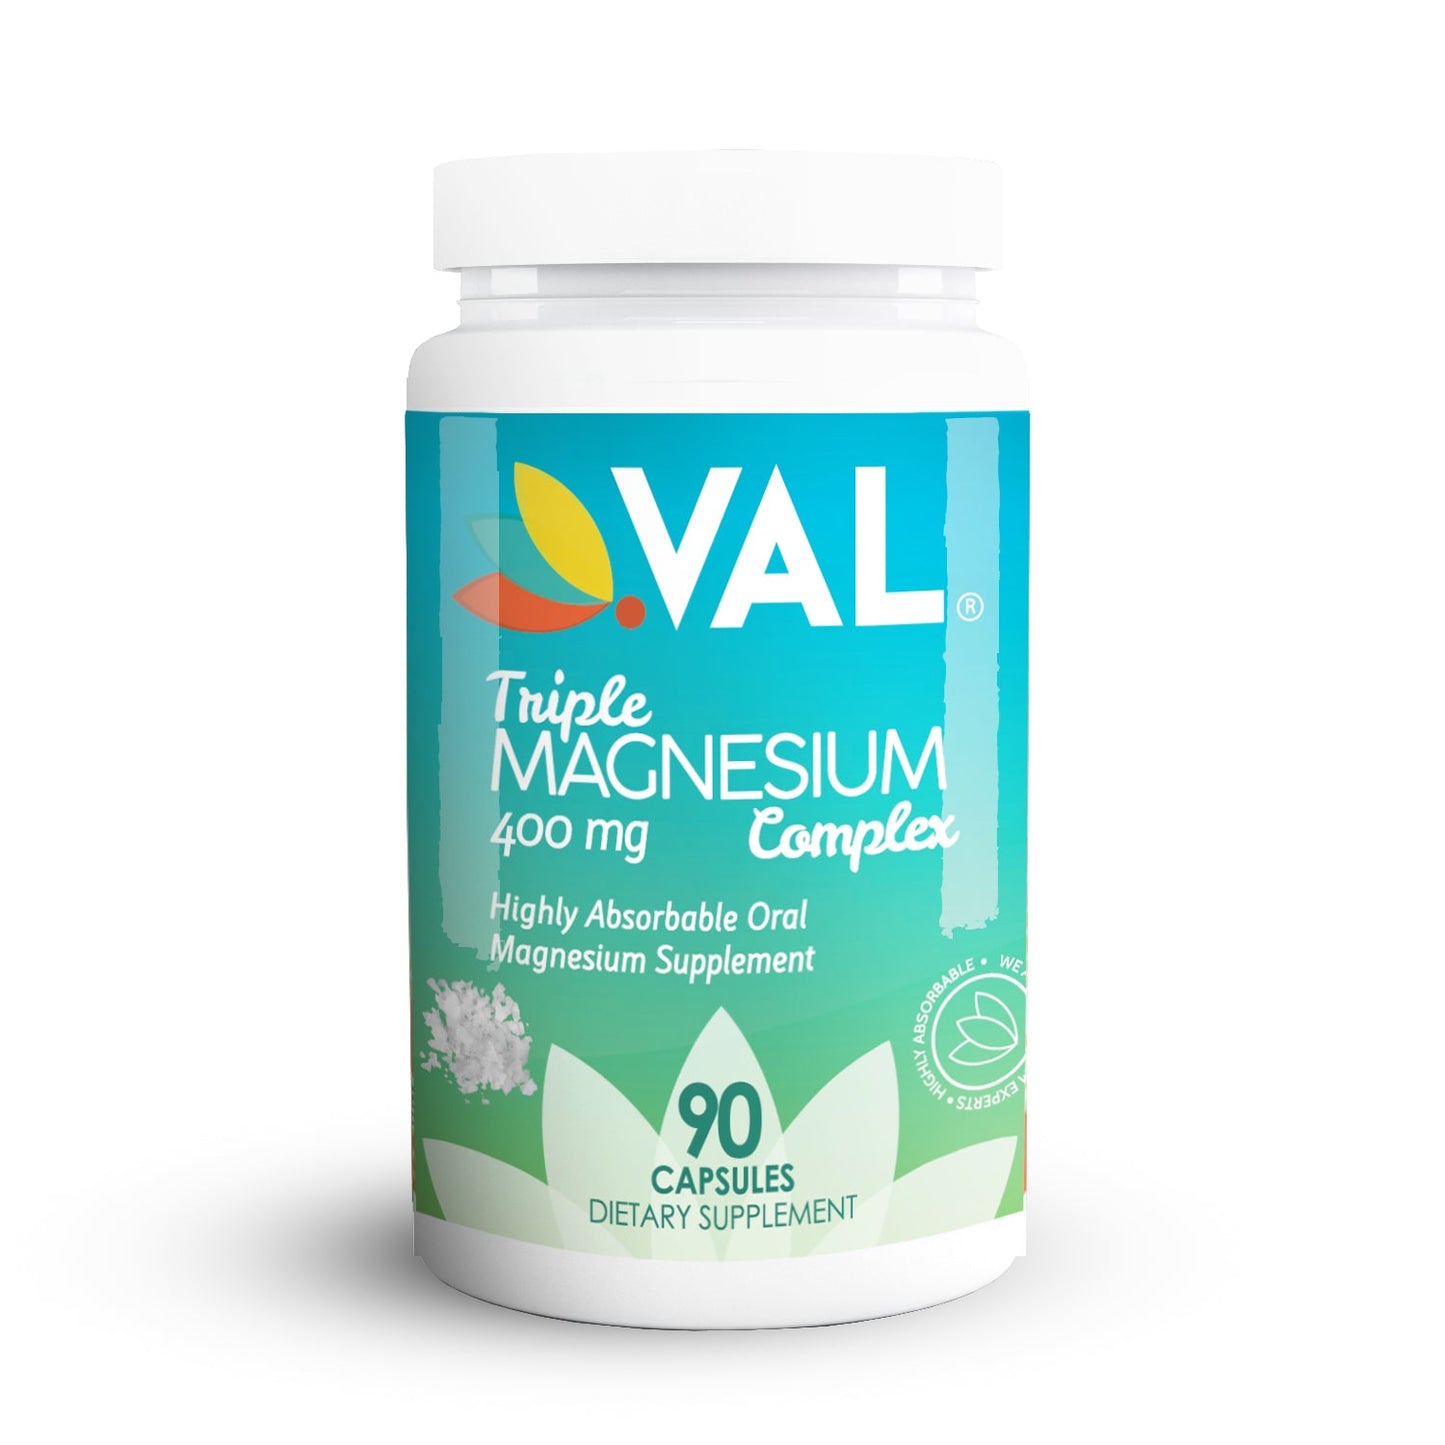 VAL Triple Magnesium Complex 400mg - Muscle Relaxation, Sleep, Support Calm, Energy Support, Healthy Magnesium Levels - 90 Capsules - Val Supplements